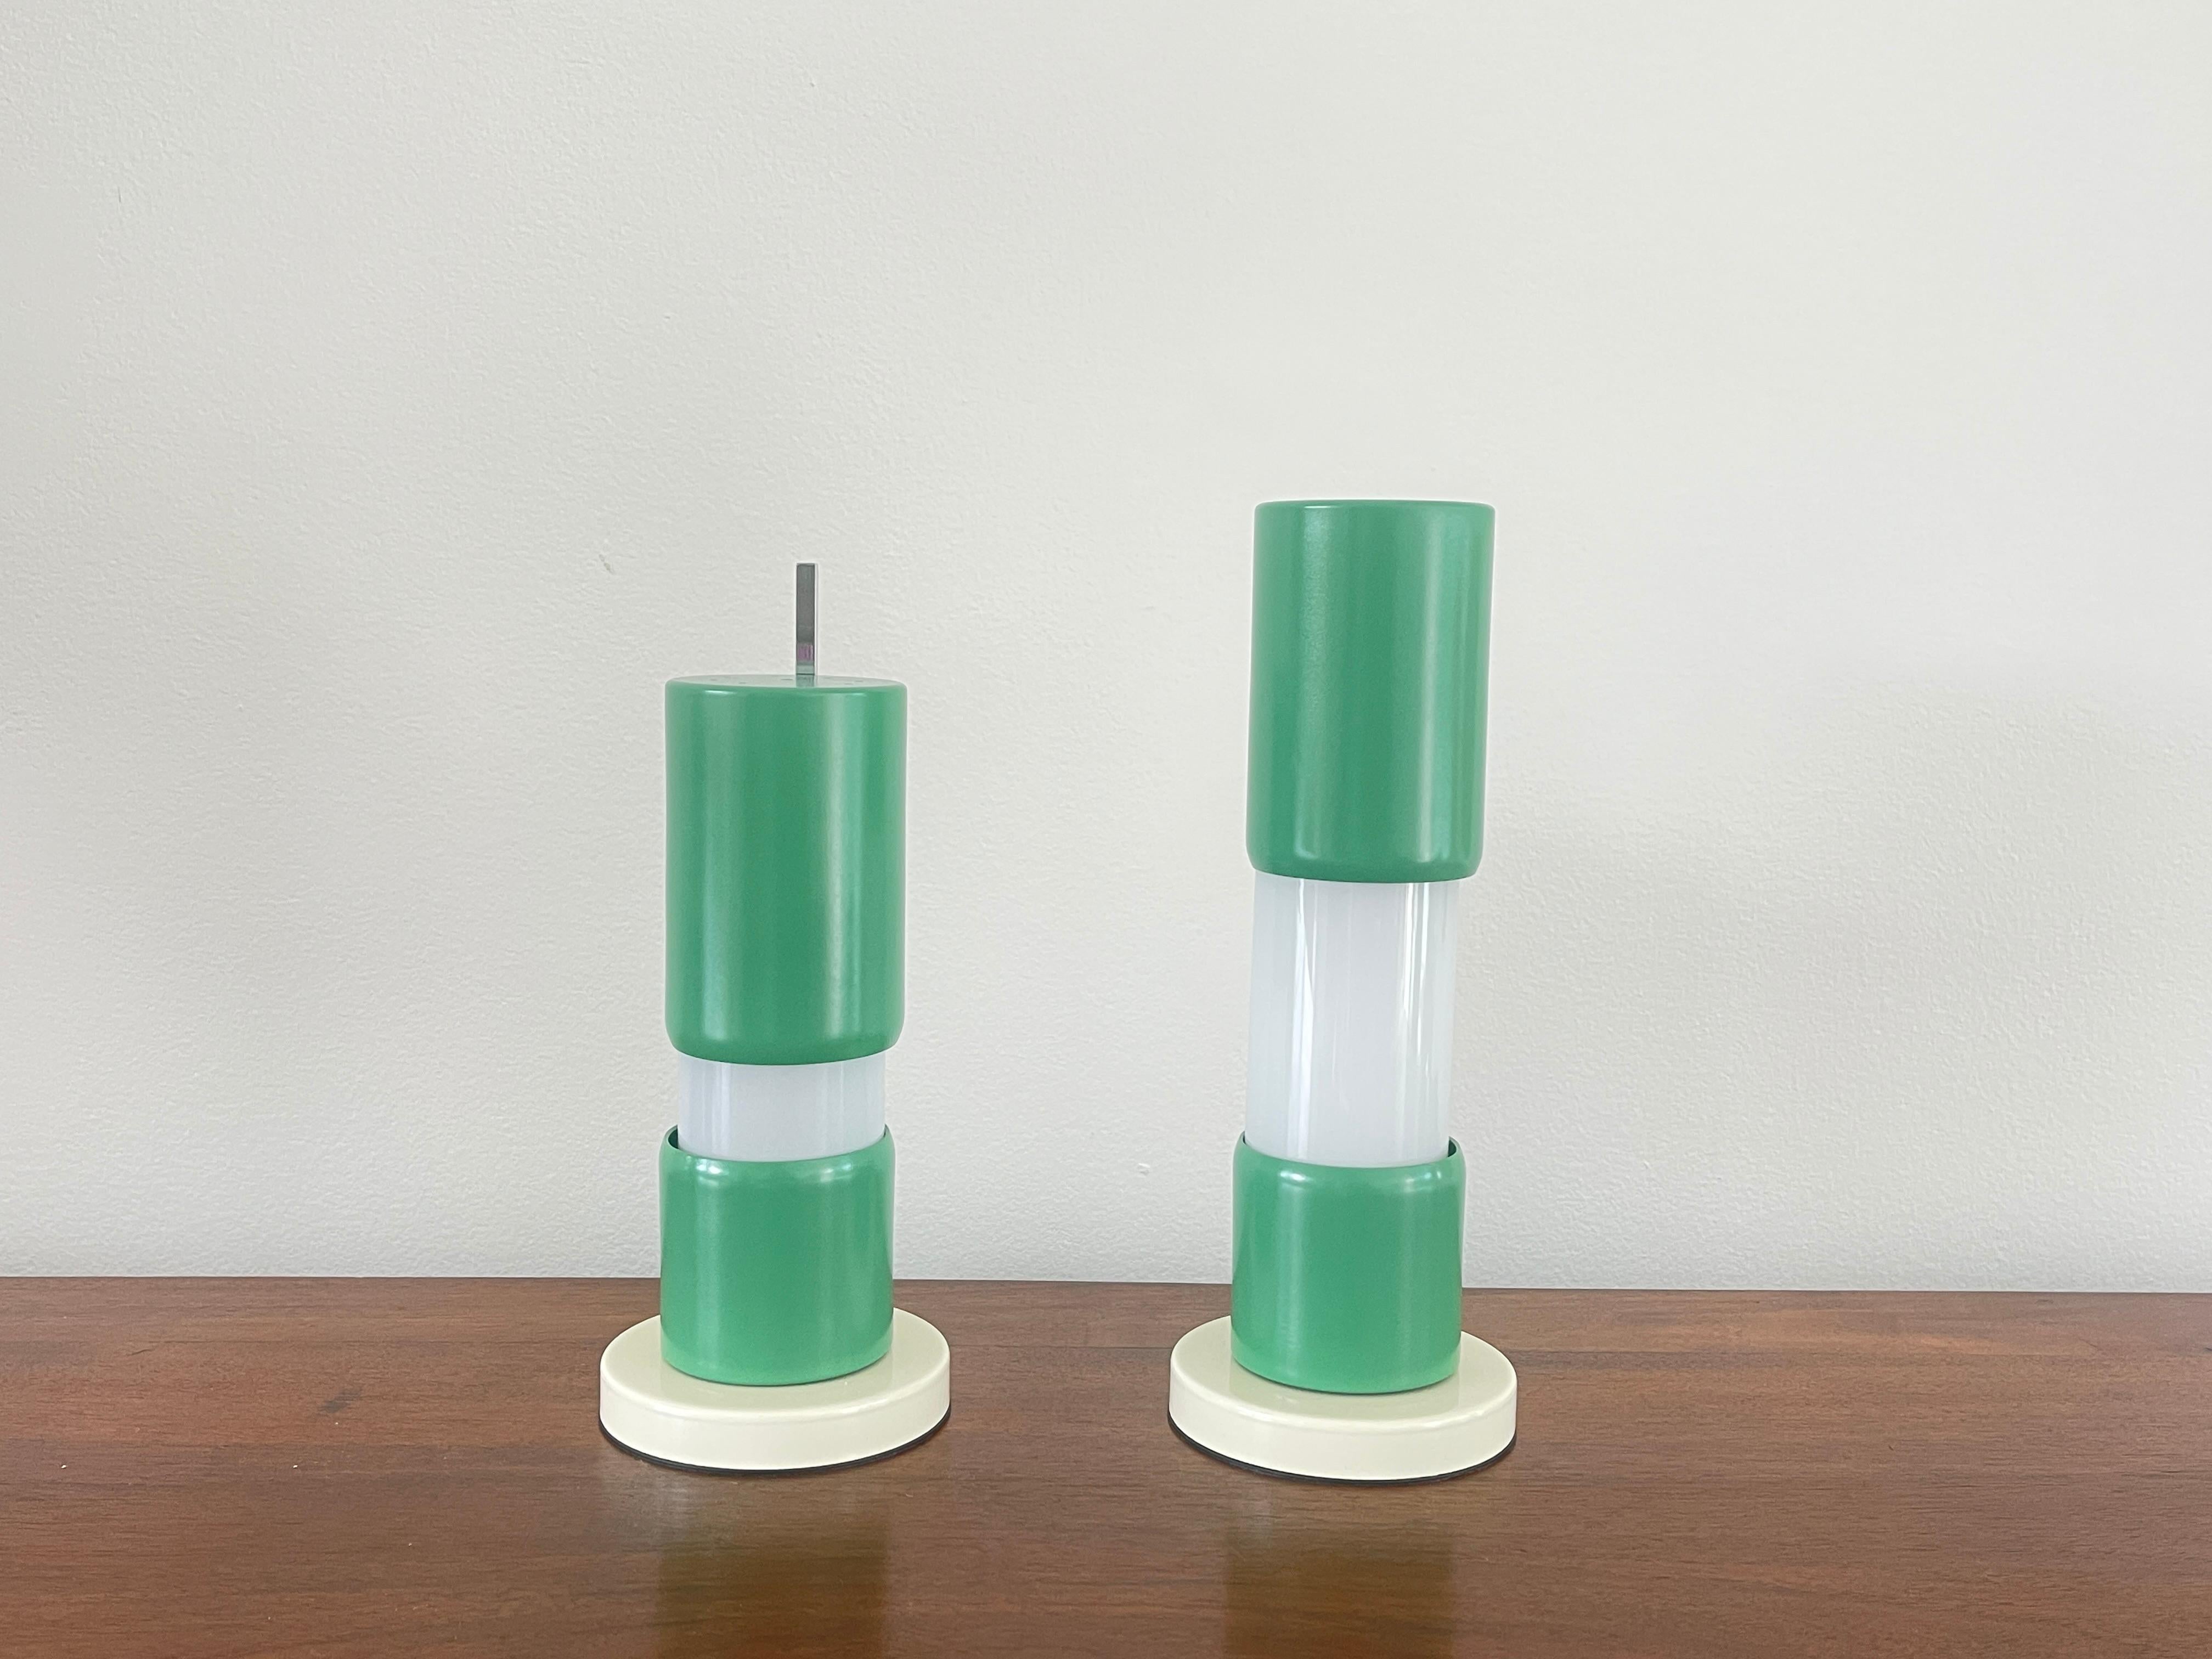 Italian desk lamps in playful green color with moveable sliding columns.